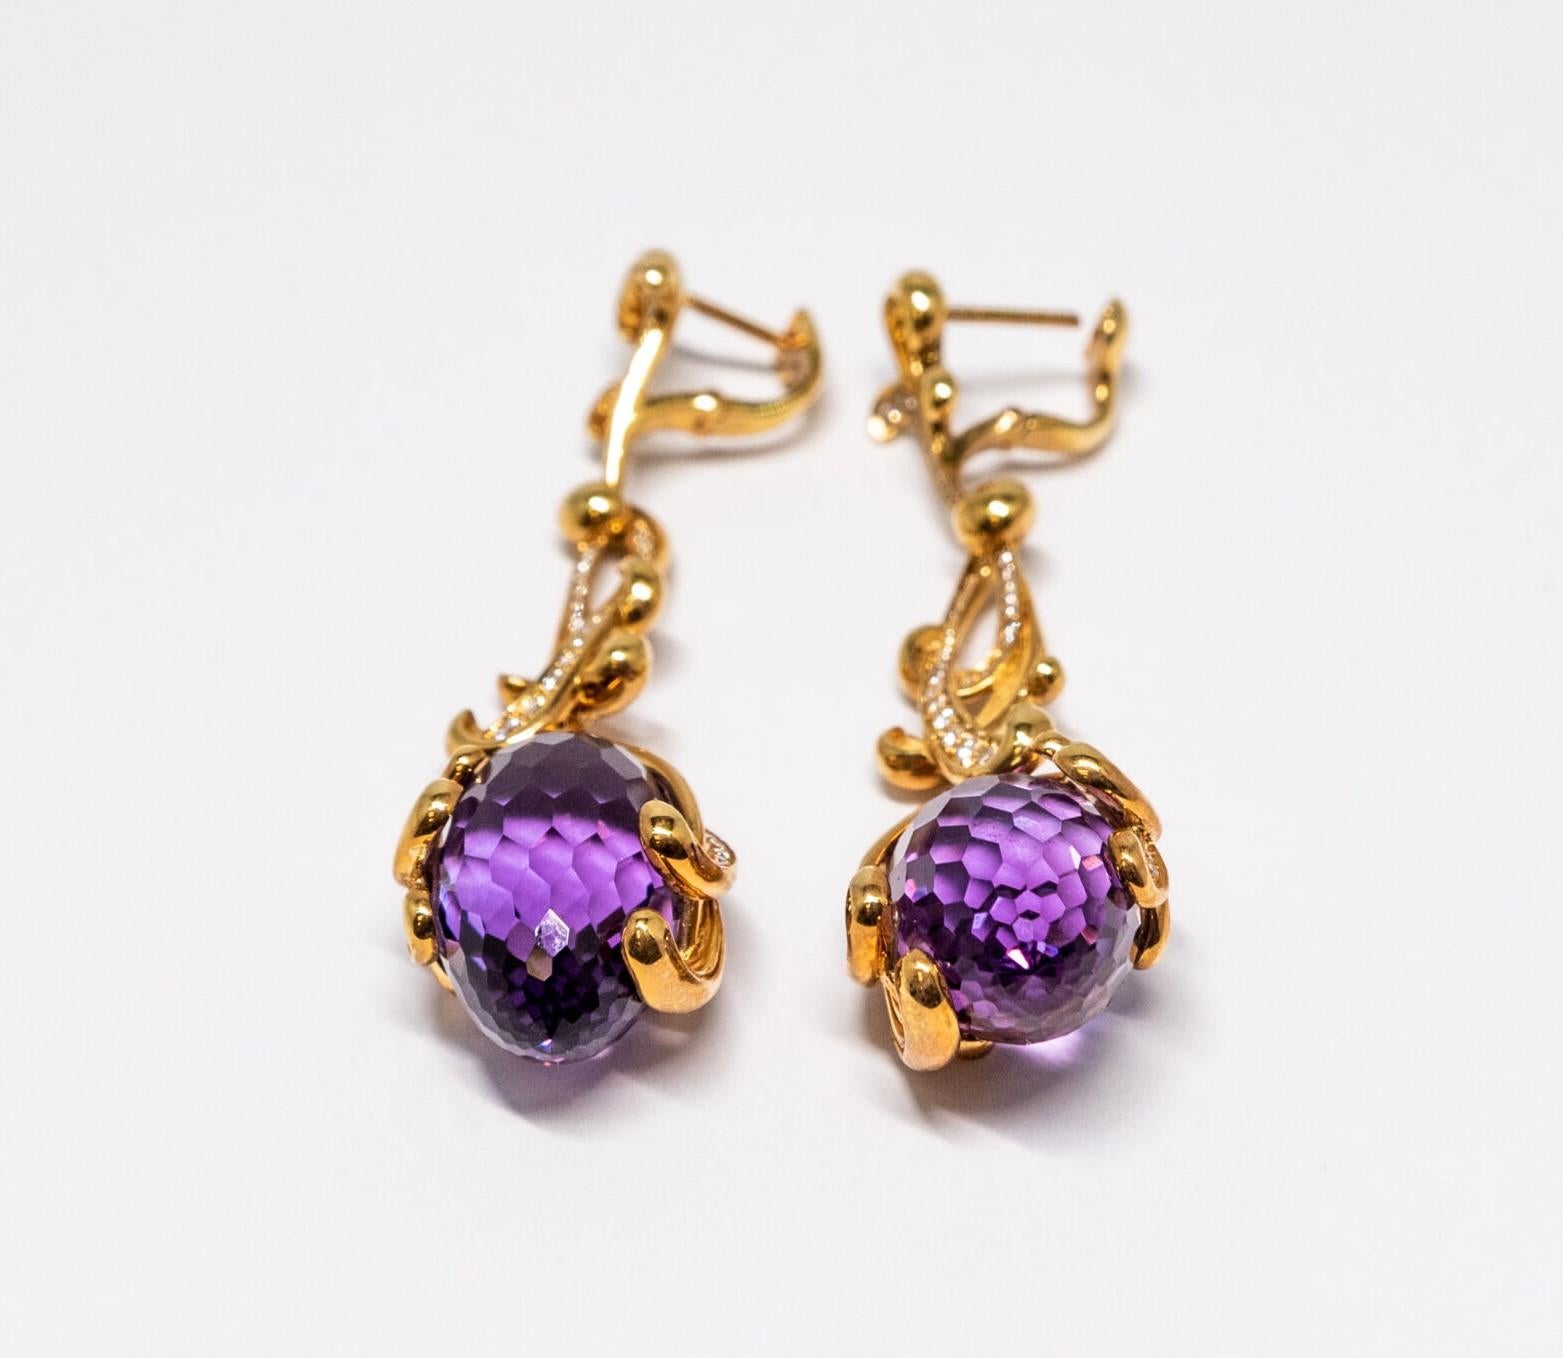 This 18K Yellow Gold English lock earring. Earrings set with 55 Diamonds (~0.62ct) and a large Amethyst stone 9 (40.42ct).  Latch back.

Dimensions: 6 cm x 2 cm